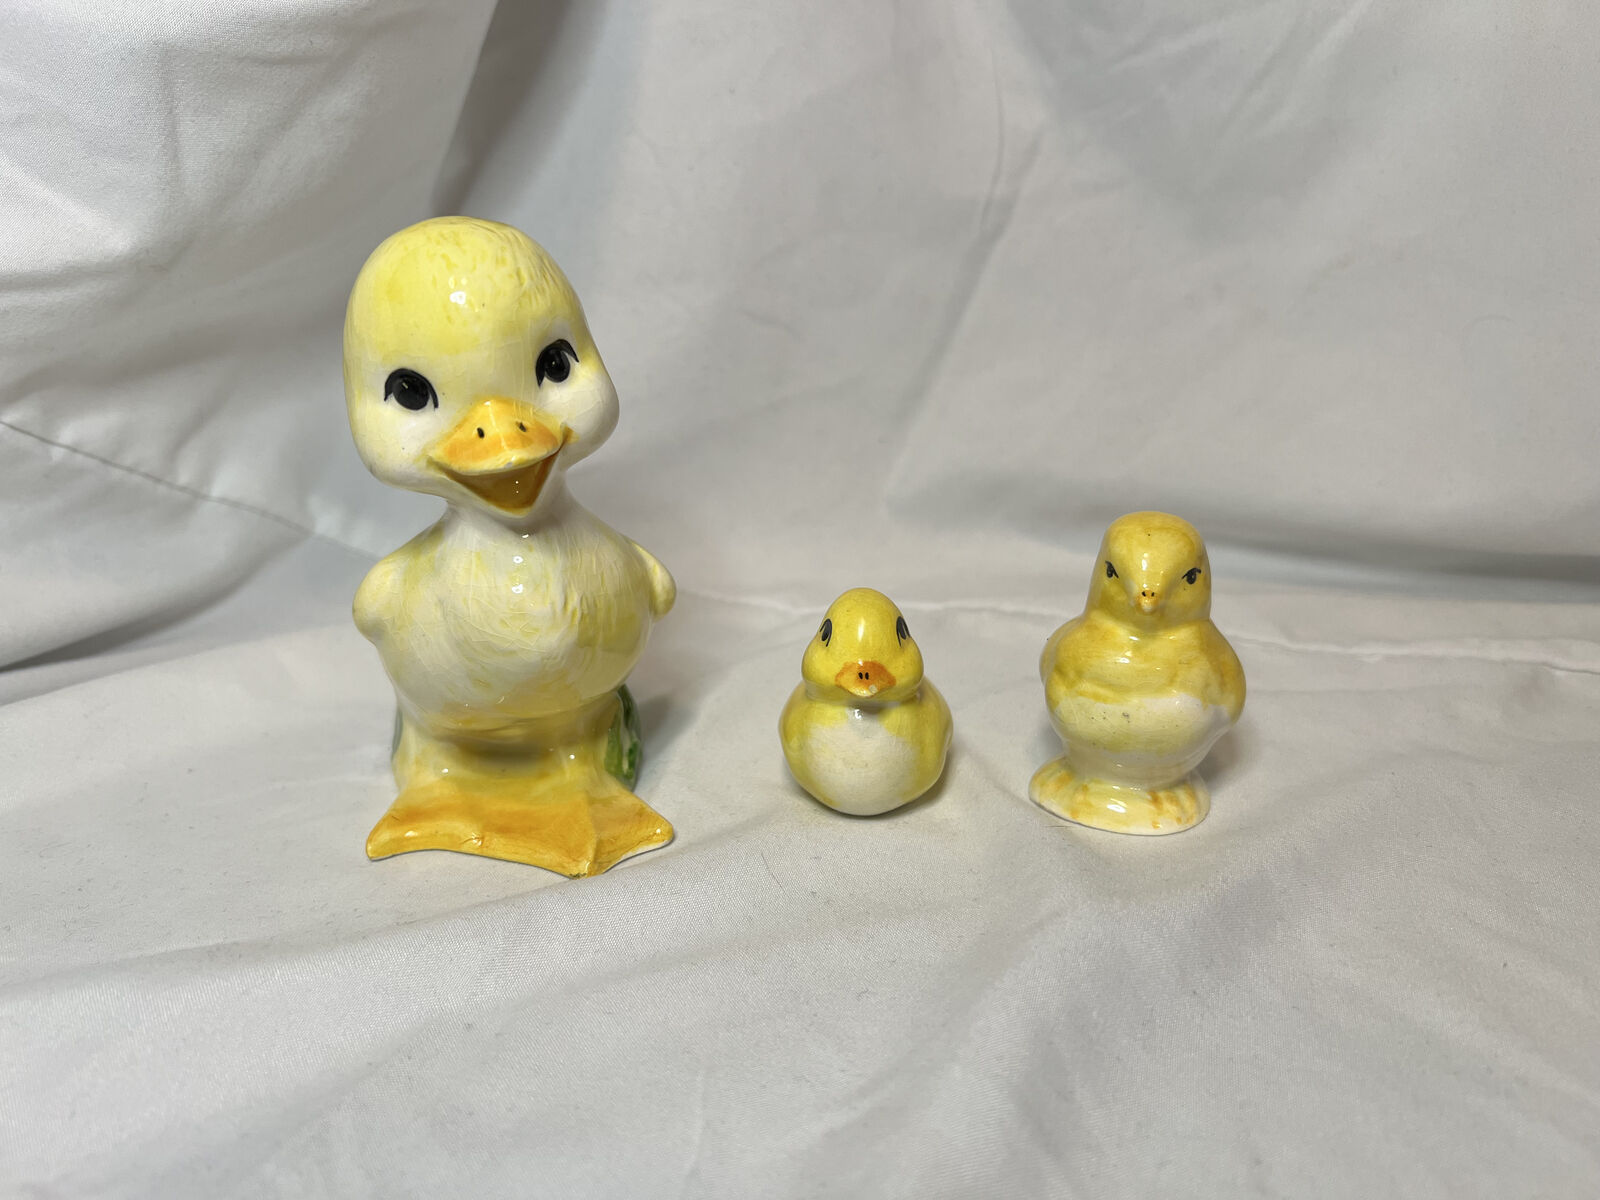 Vintage Adorable Animal Ceramic Figurines (3) 2 Ducks and a Baby Chick